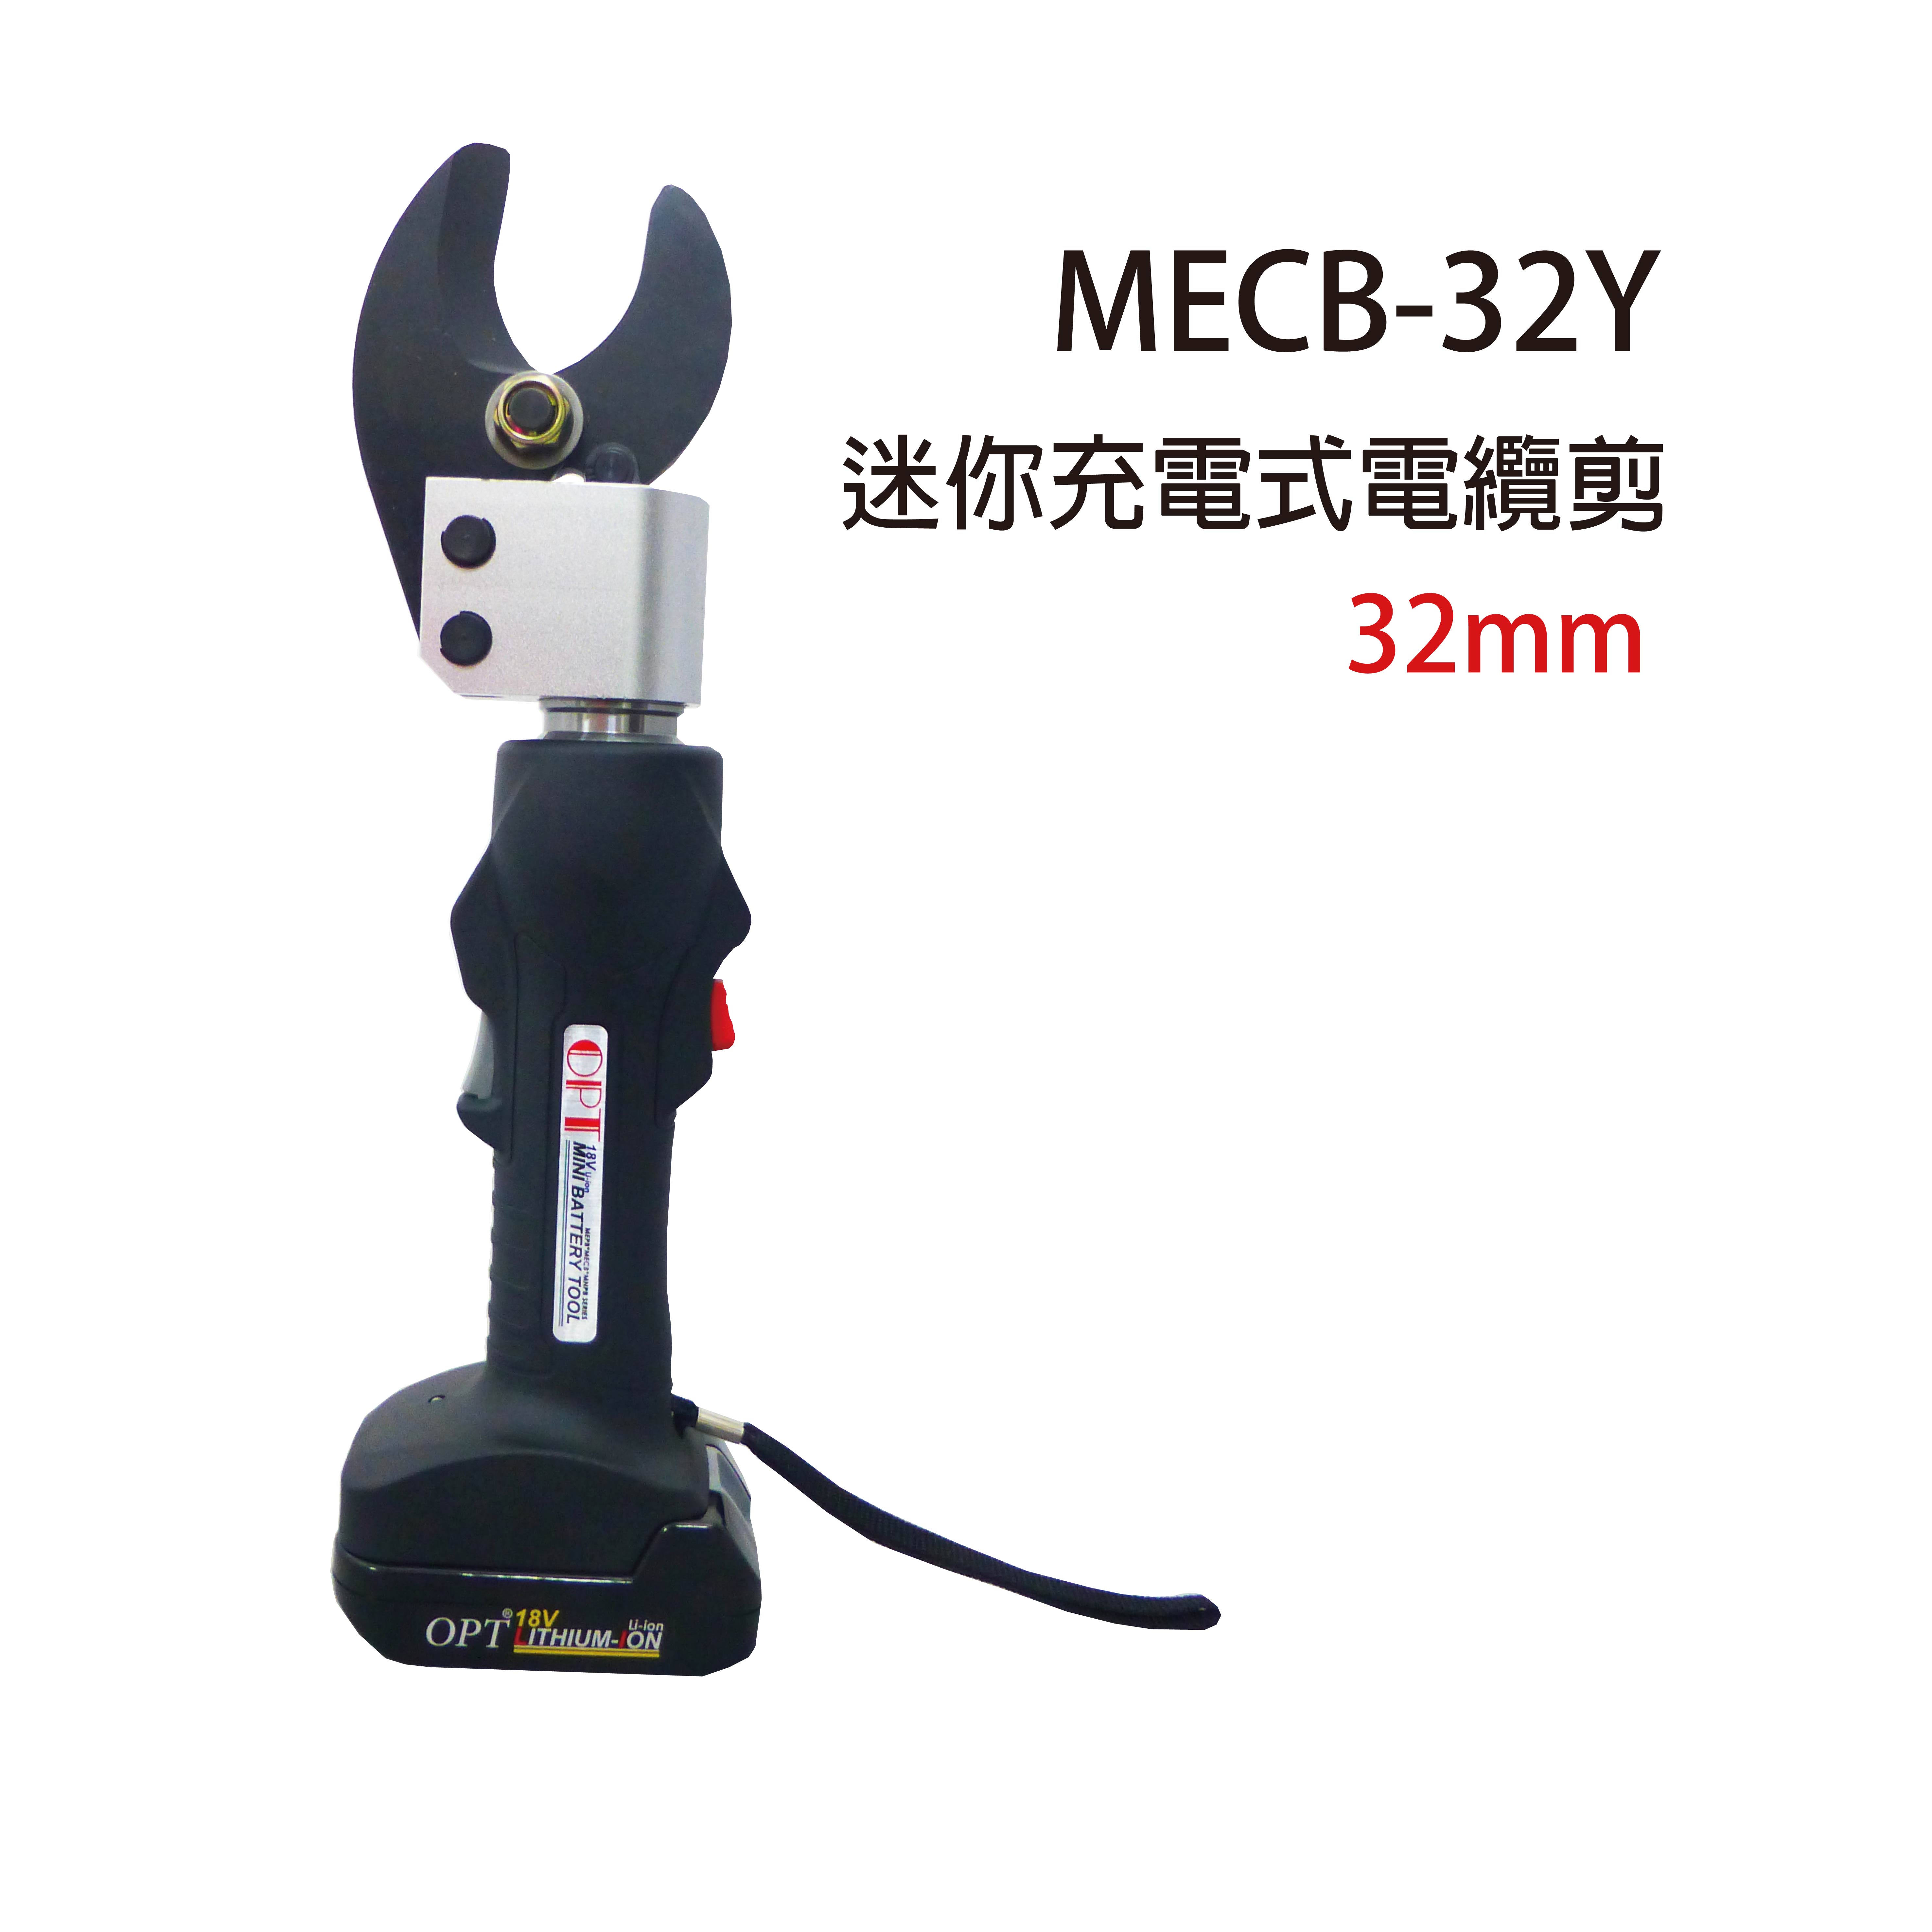 MECB-32Y CORDLESS HYDRAULIC CABLE CUTTERS